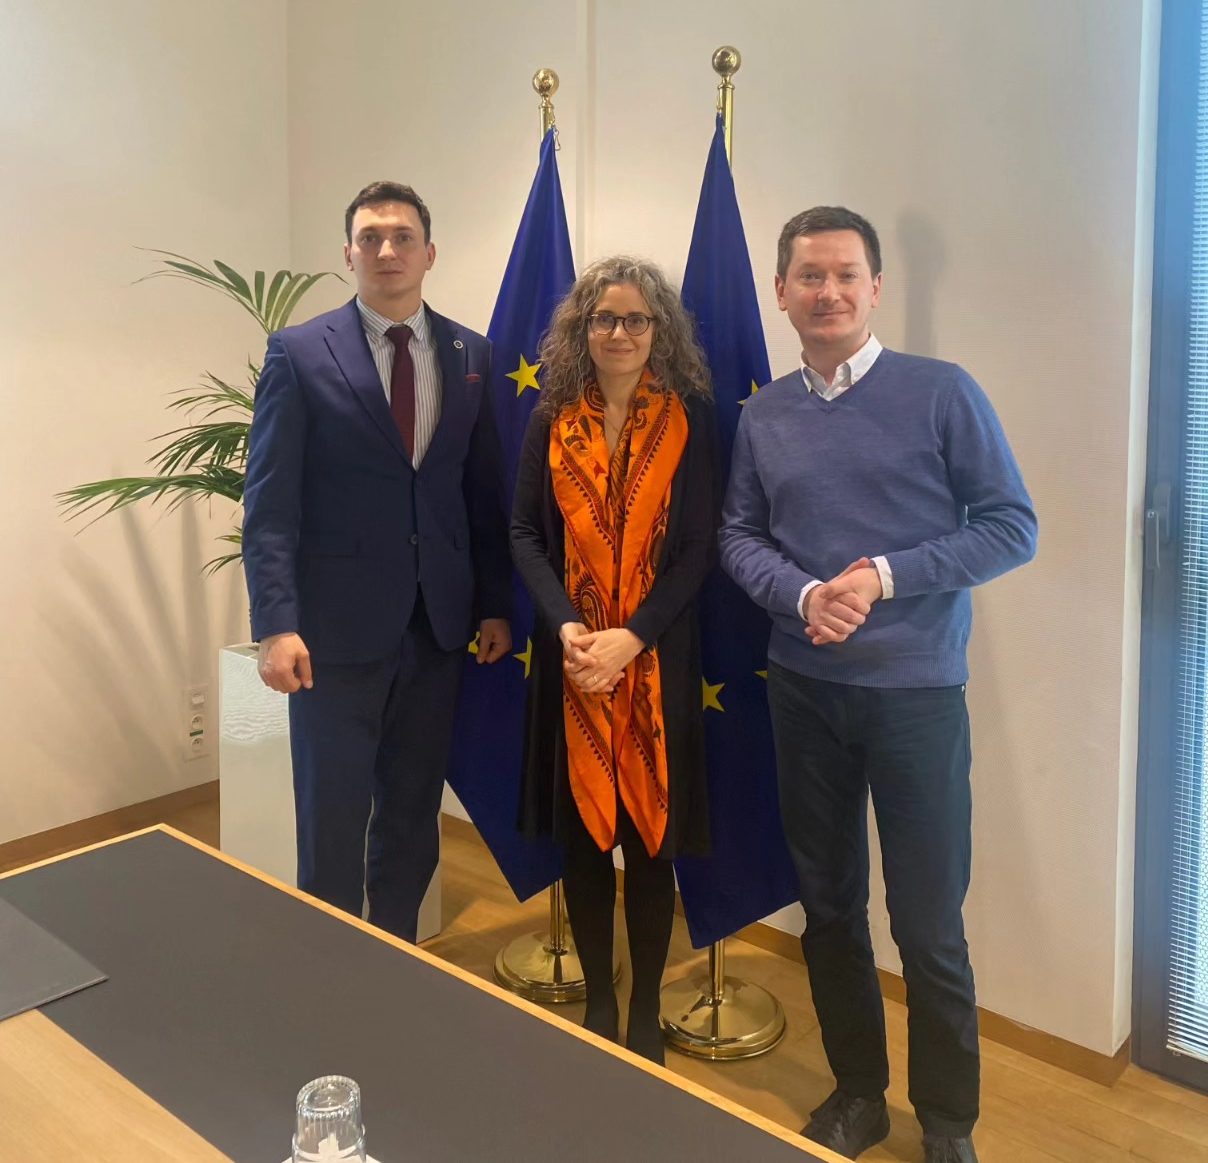 Today PU team had a very constructive discussion with Ms. Magdalena Grono, Senior Foreign Policy Advisor on Ukraine and Eastern Partnership countries